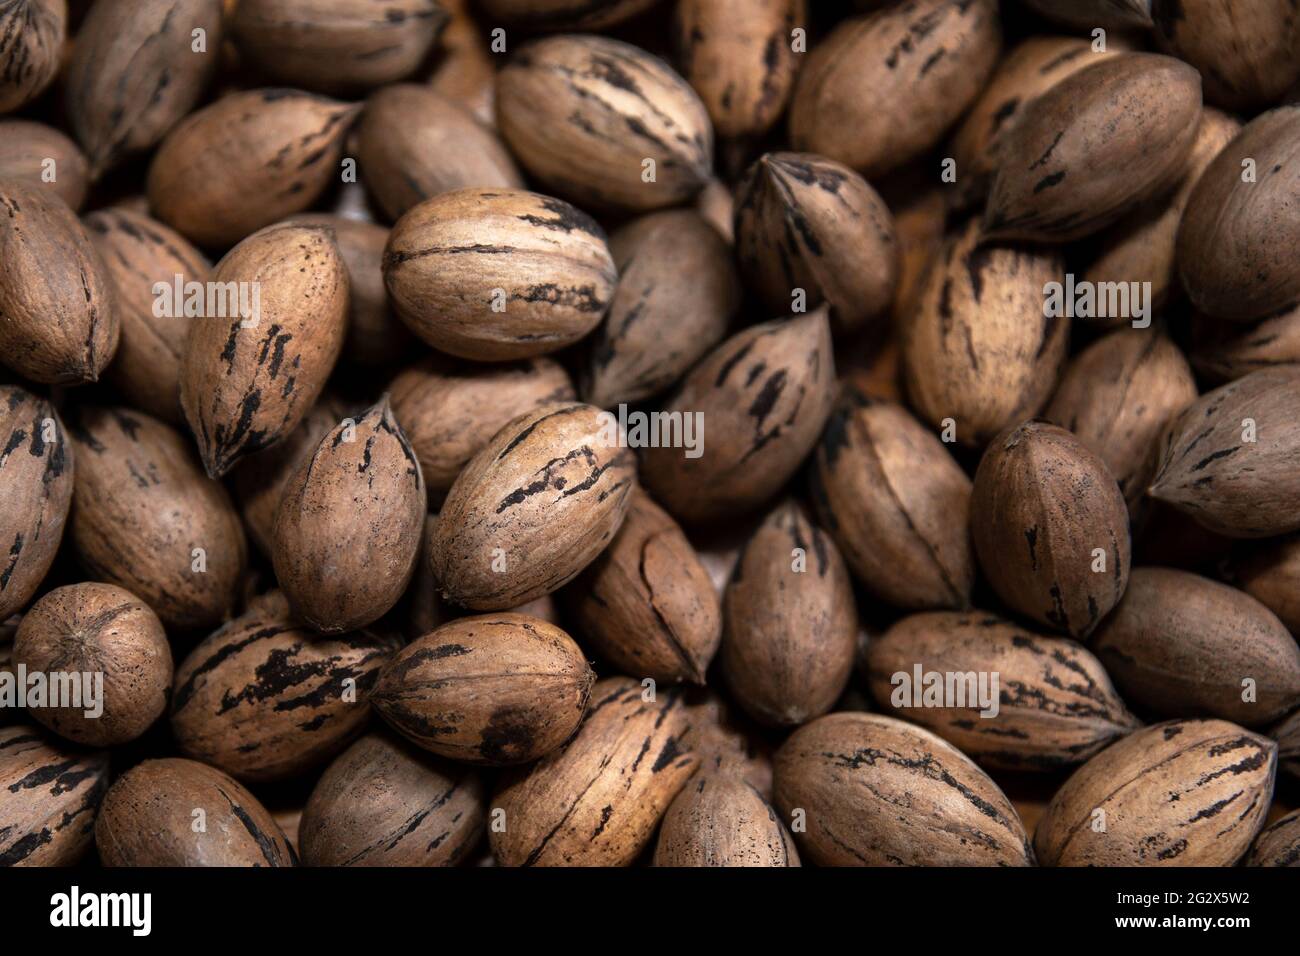 Raw in shell whole Pecan nuts Stock Photo